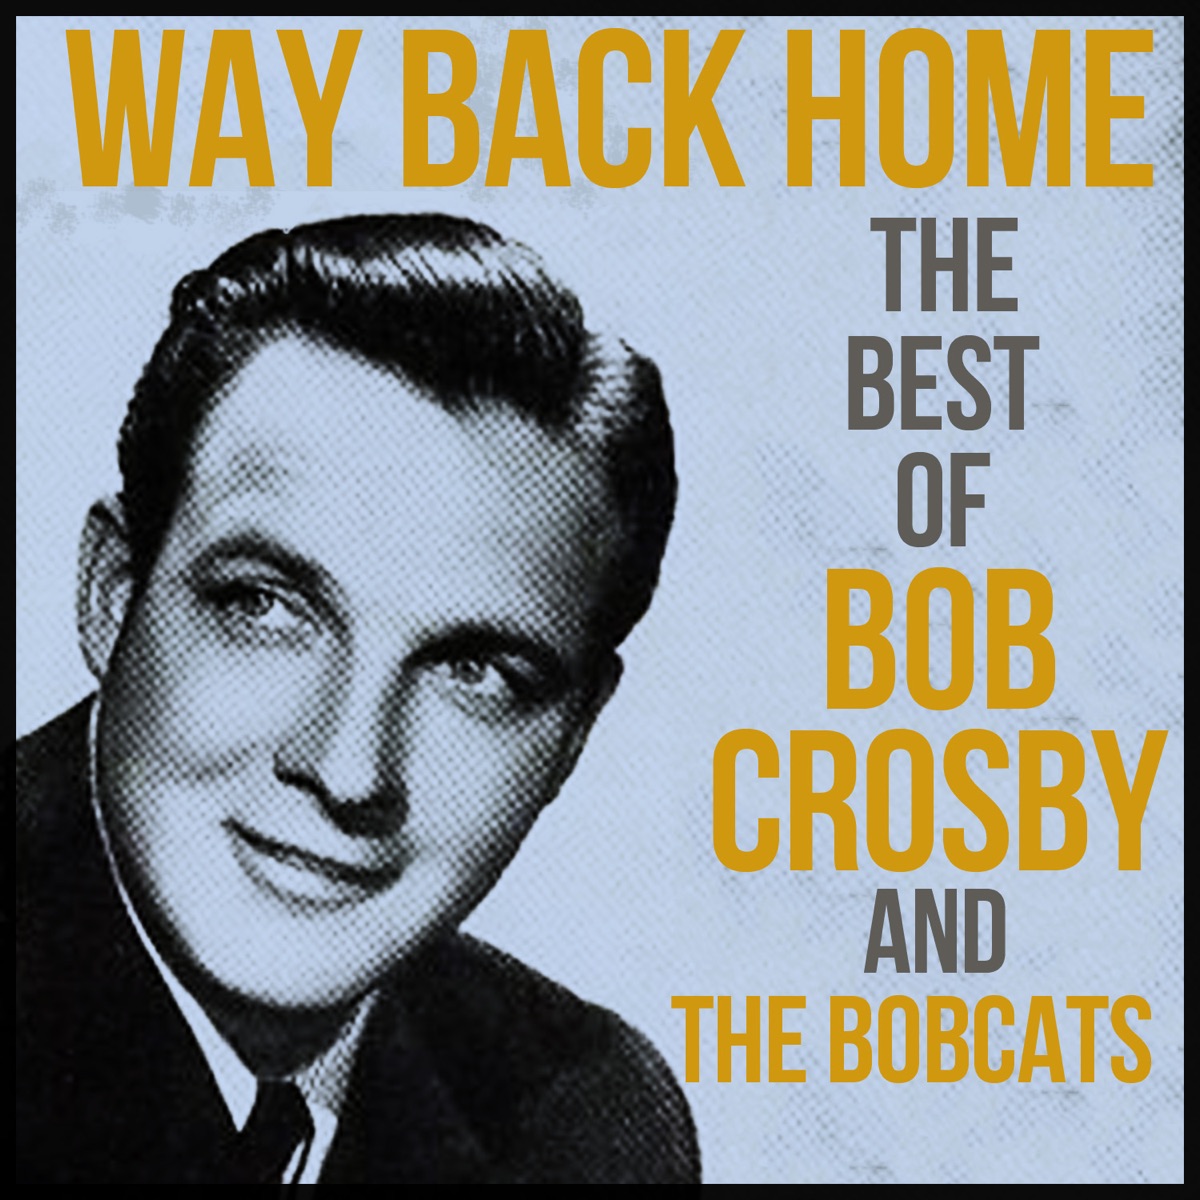 Альбом «Way Back Home: The Best of Bob Crosby and the Bobcats» — Bob Crosby  — Apple Music